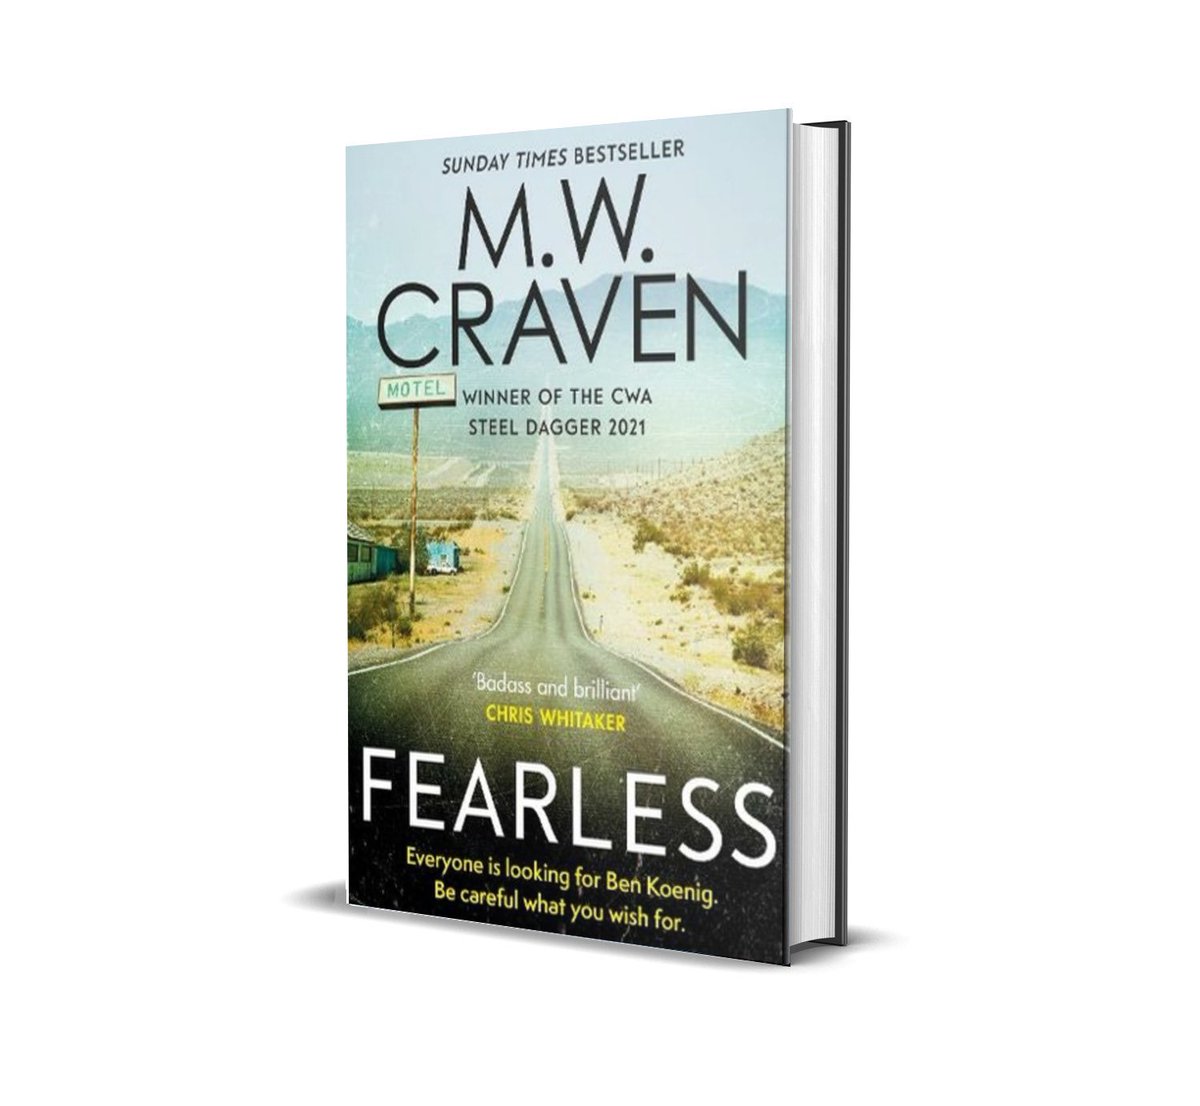 After hearing good things from @SteveCavanagh_ and @ameranwar I’m now even more excited for @MWCravenUK action thriller #Fearless I can not wait to meet Ben Koenig.